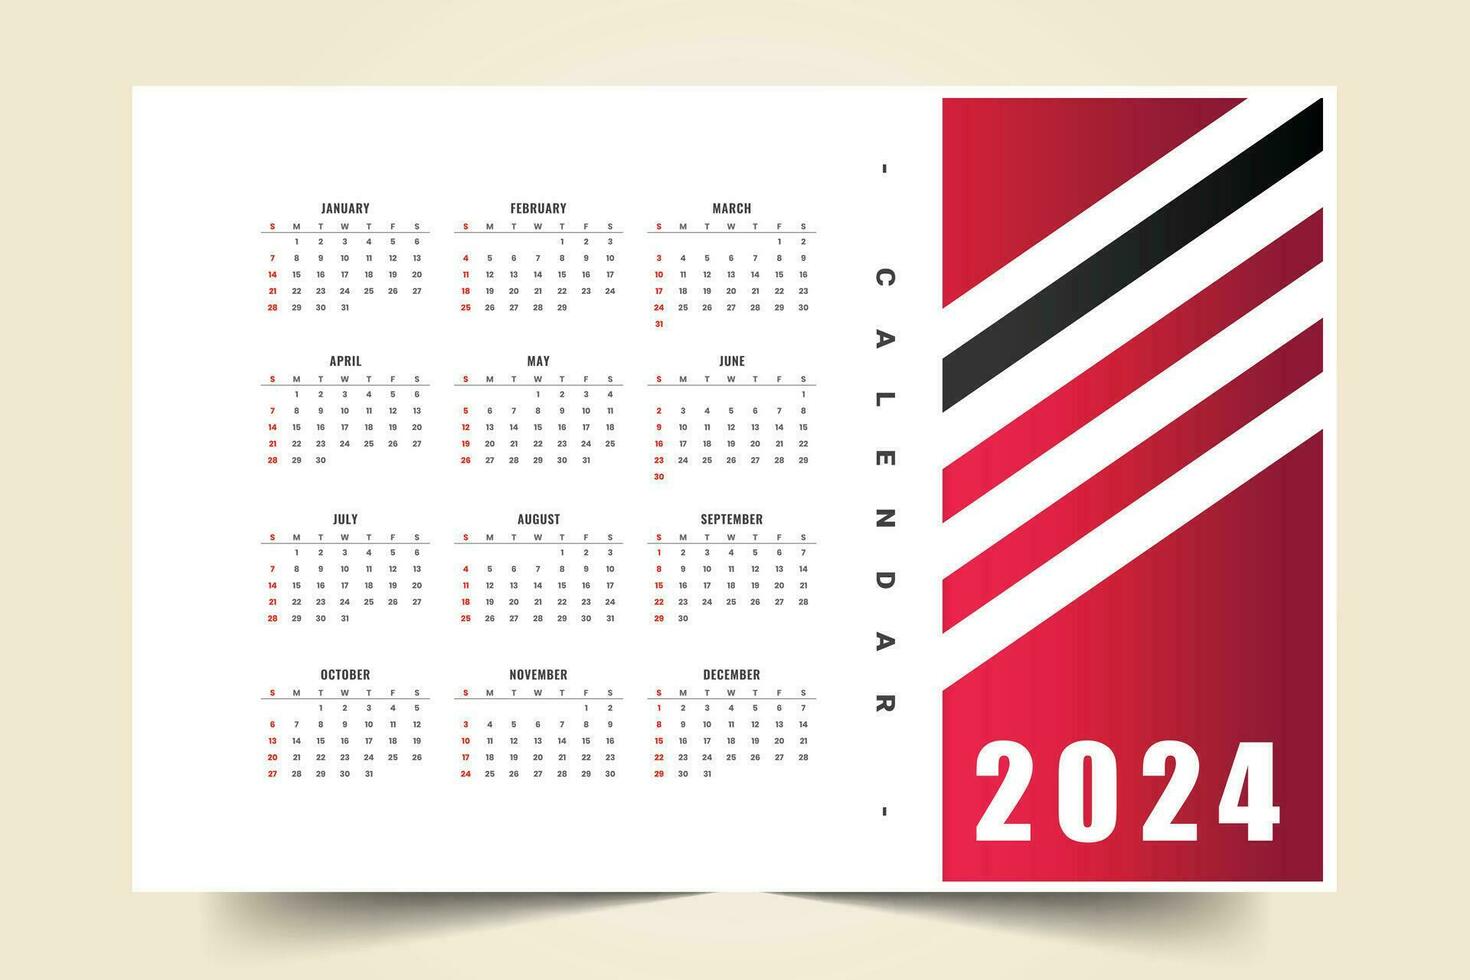 stylish 2024 new year calendar template with months and dates vector